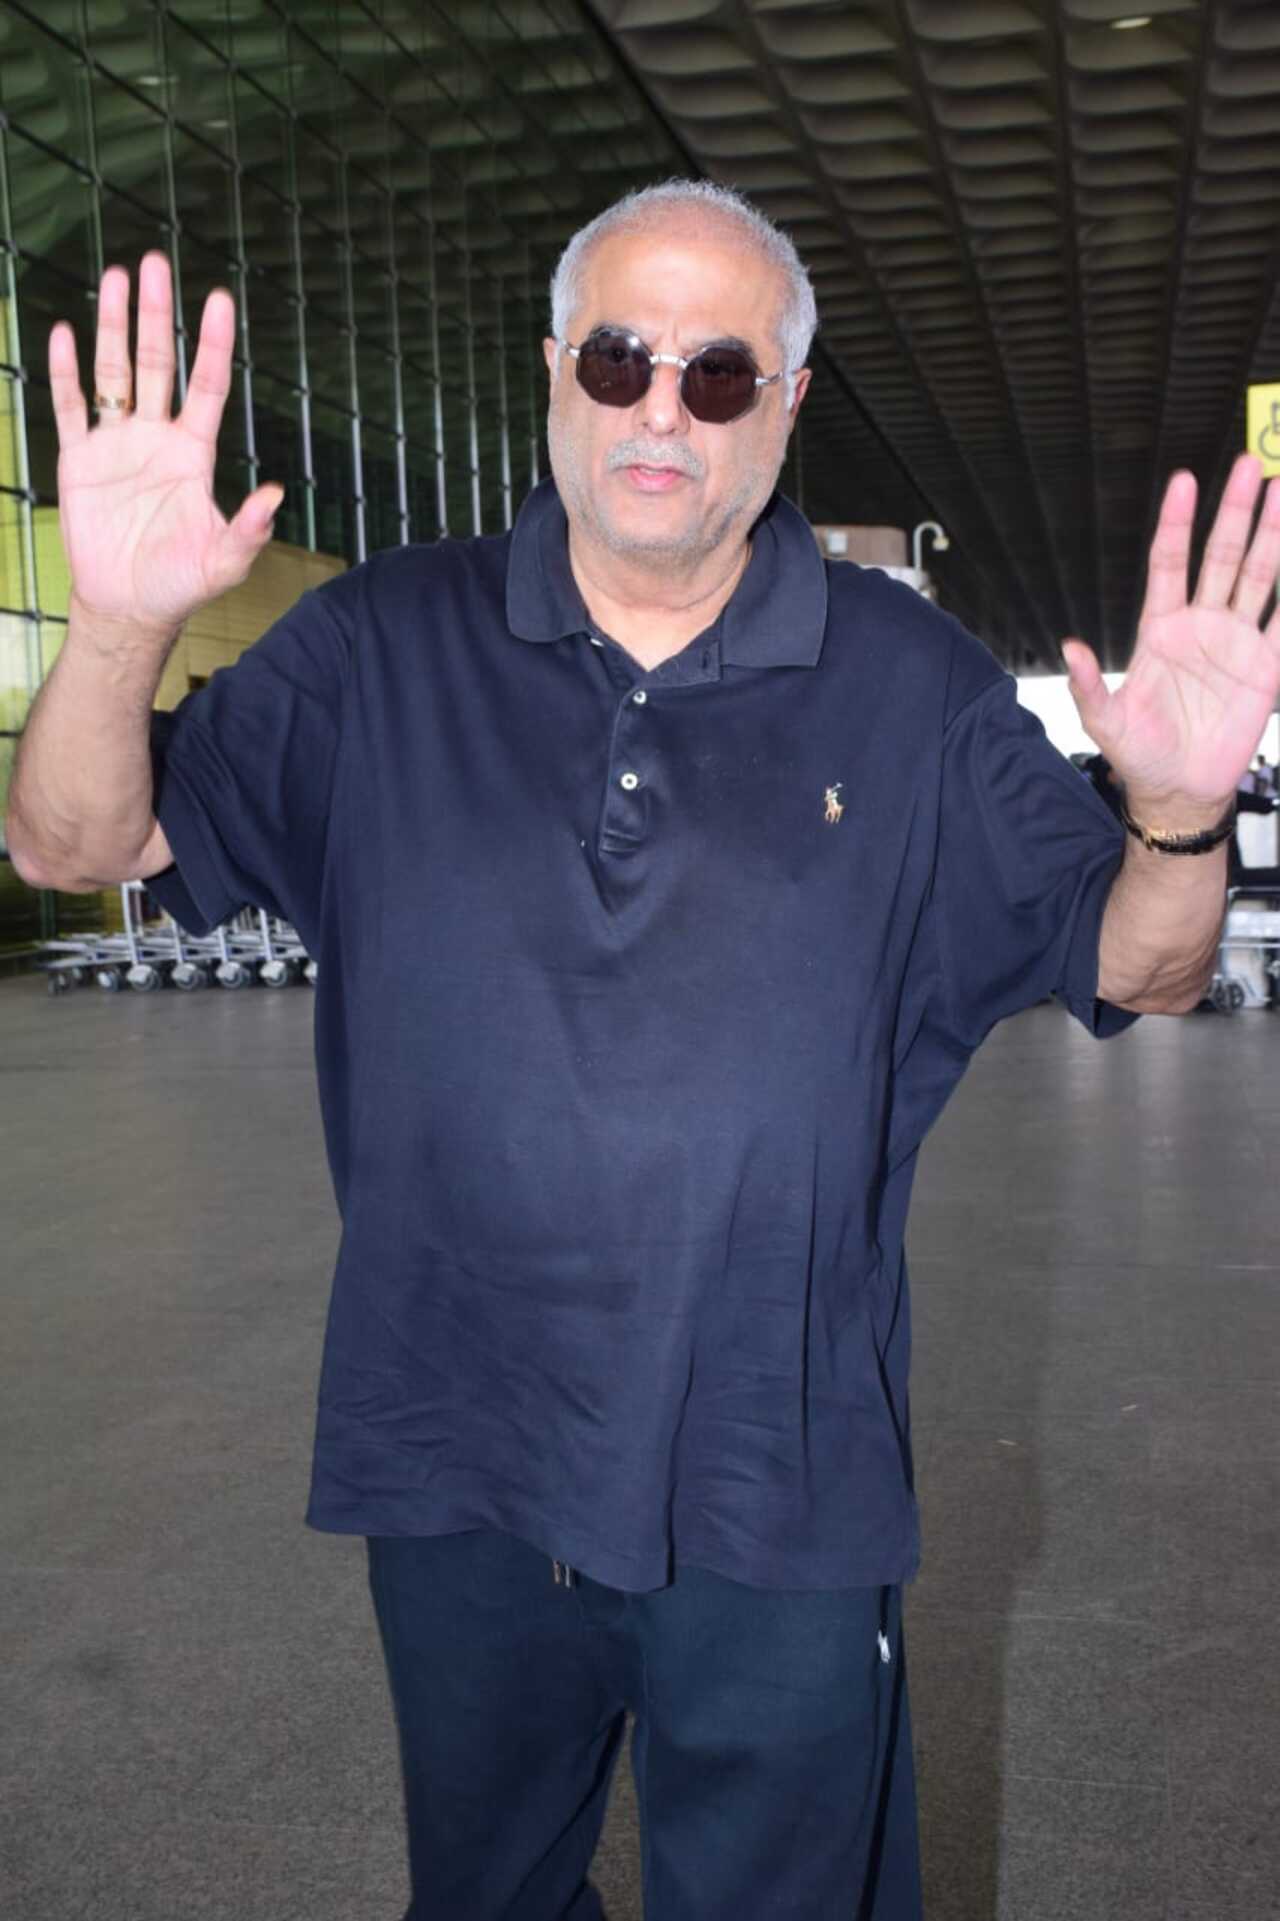 Boney Kapoor was spotted in casuals at the Mumbai airport